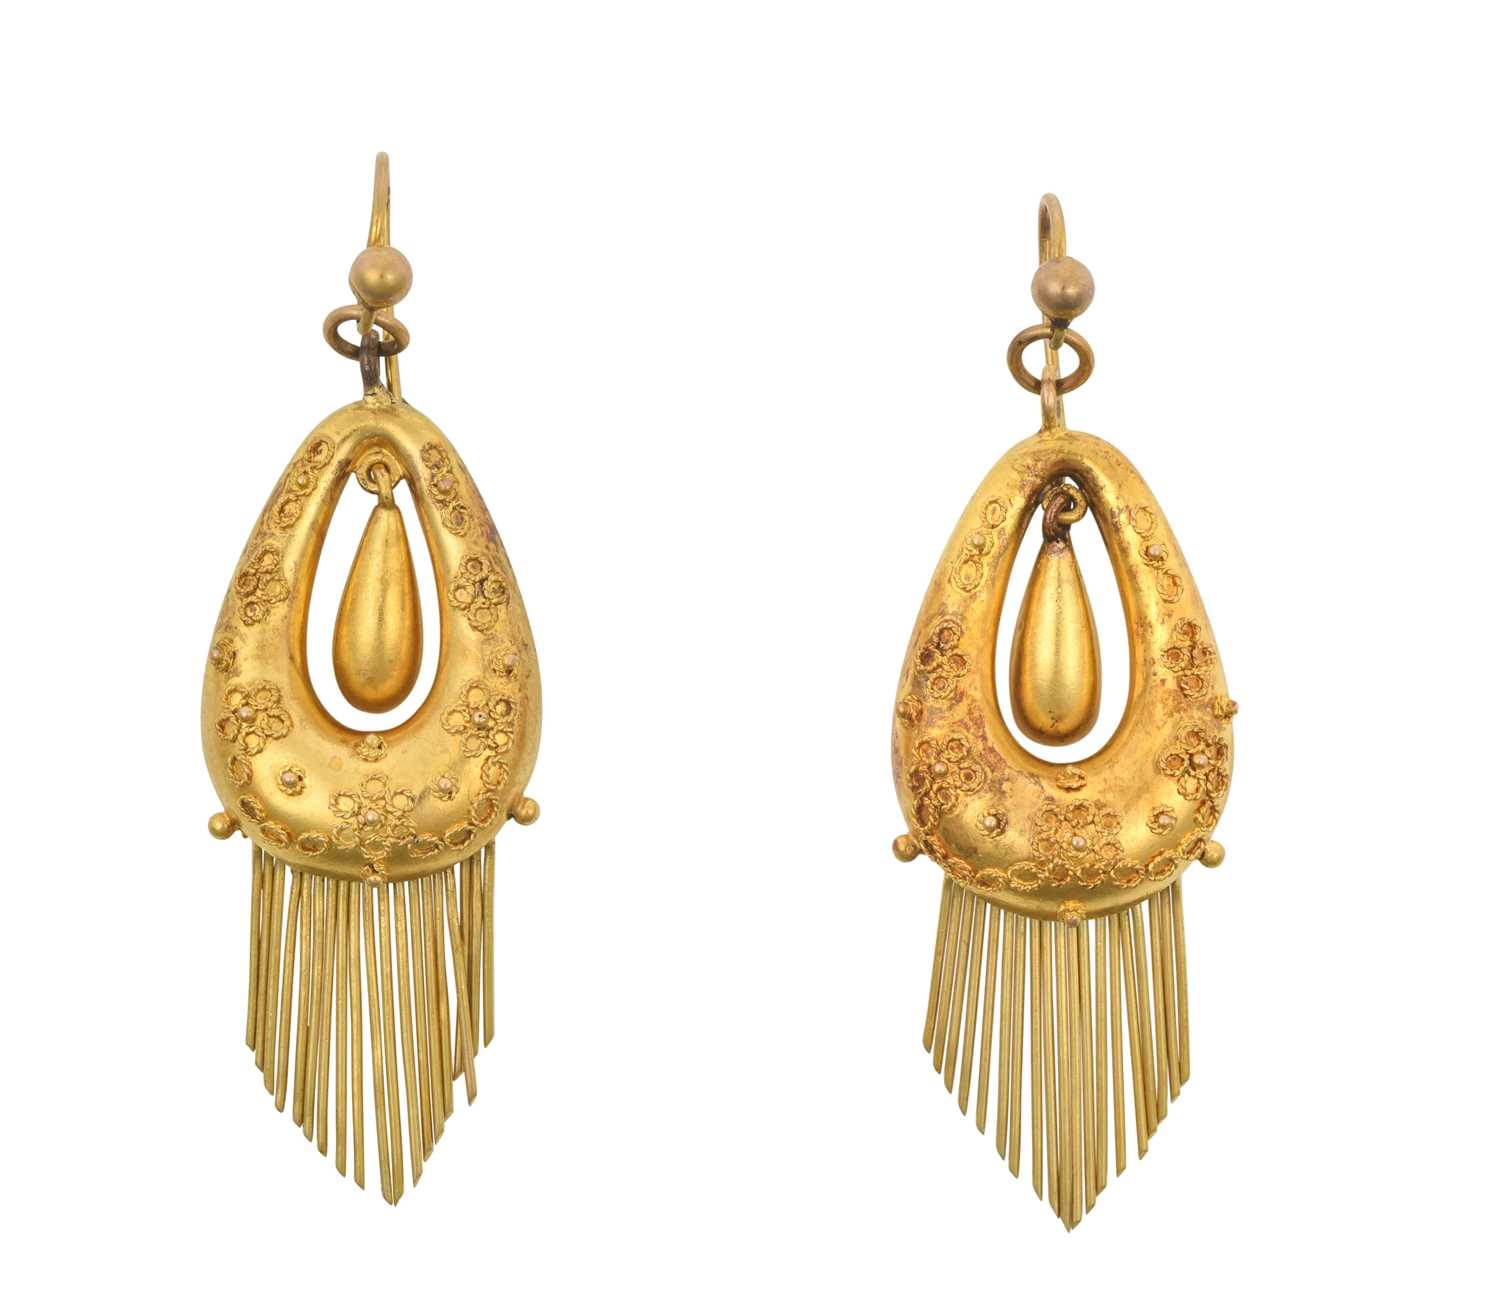 A Pair of Victorian Drop Earrings of pear shaped openwork form, with fringe and cannetille